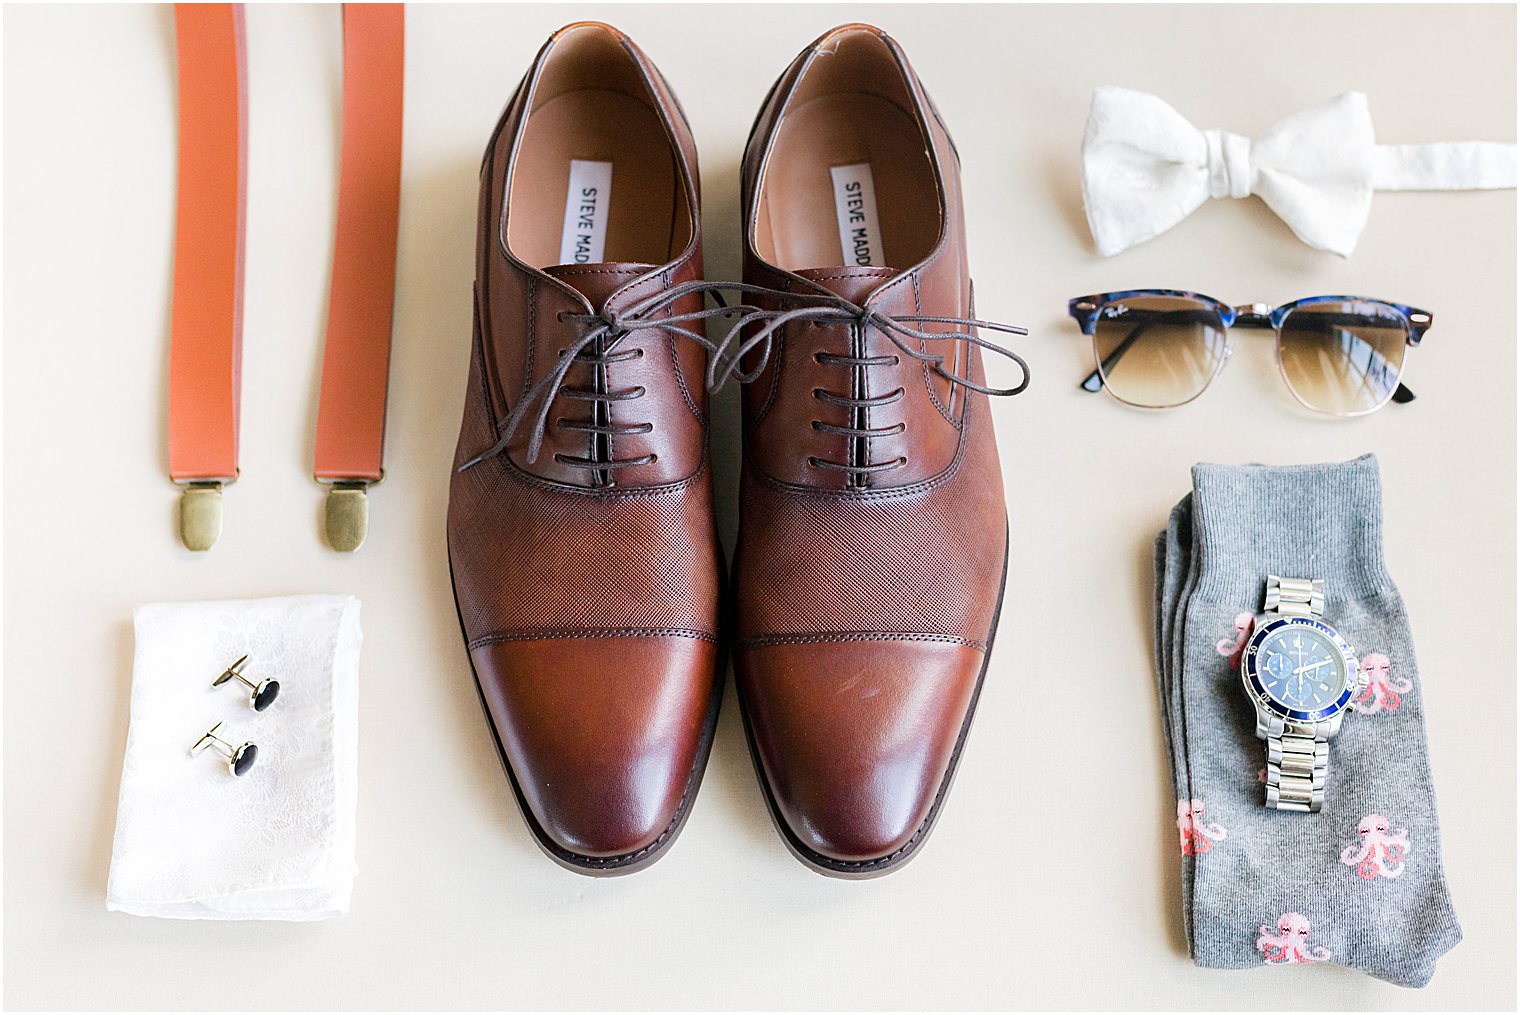 groom's shoes and tie for summer wedding